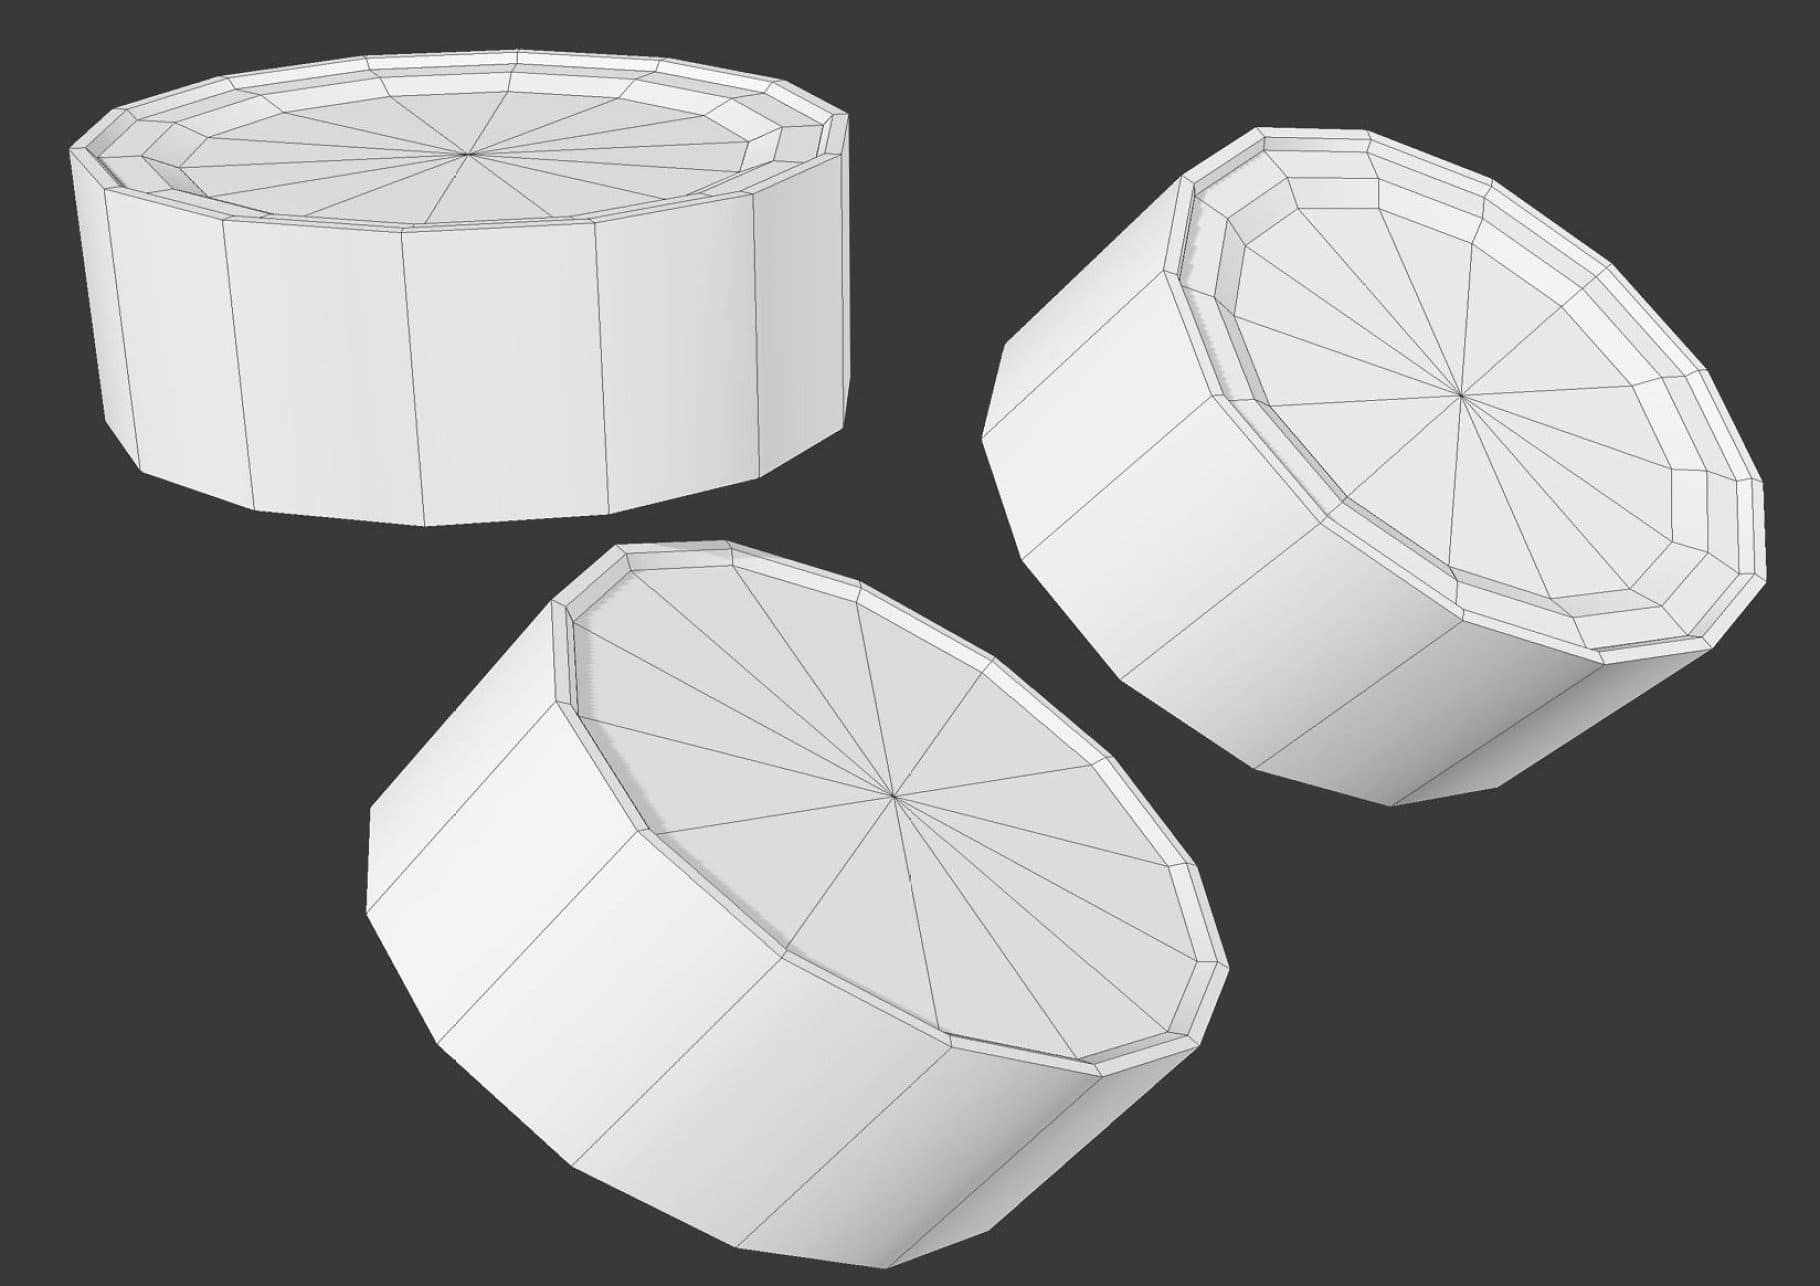 White 3D models in the form of tuna cans.